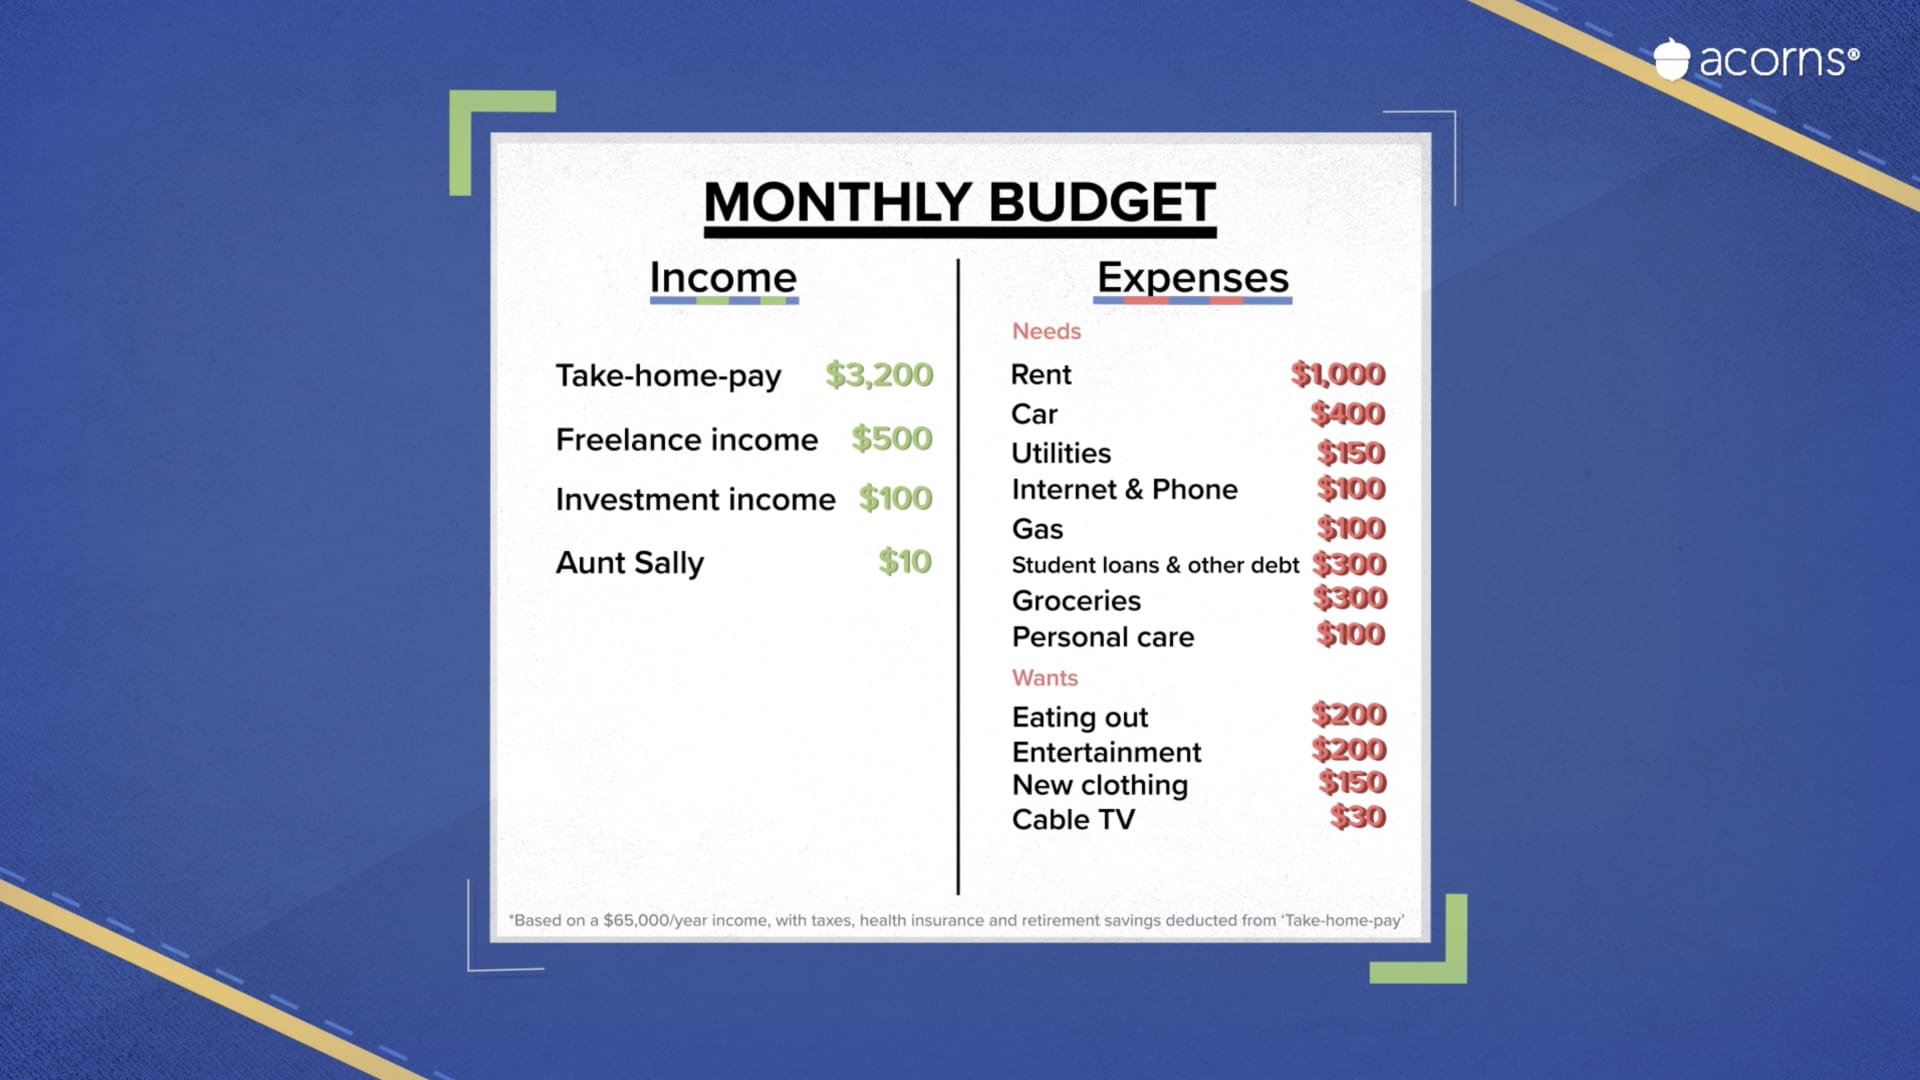 Sample monthly budget